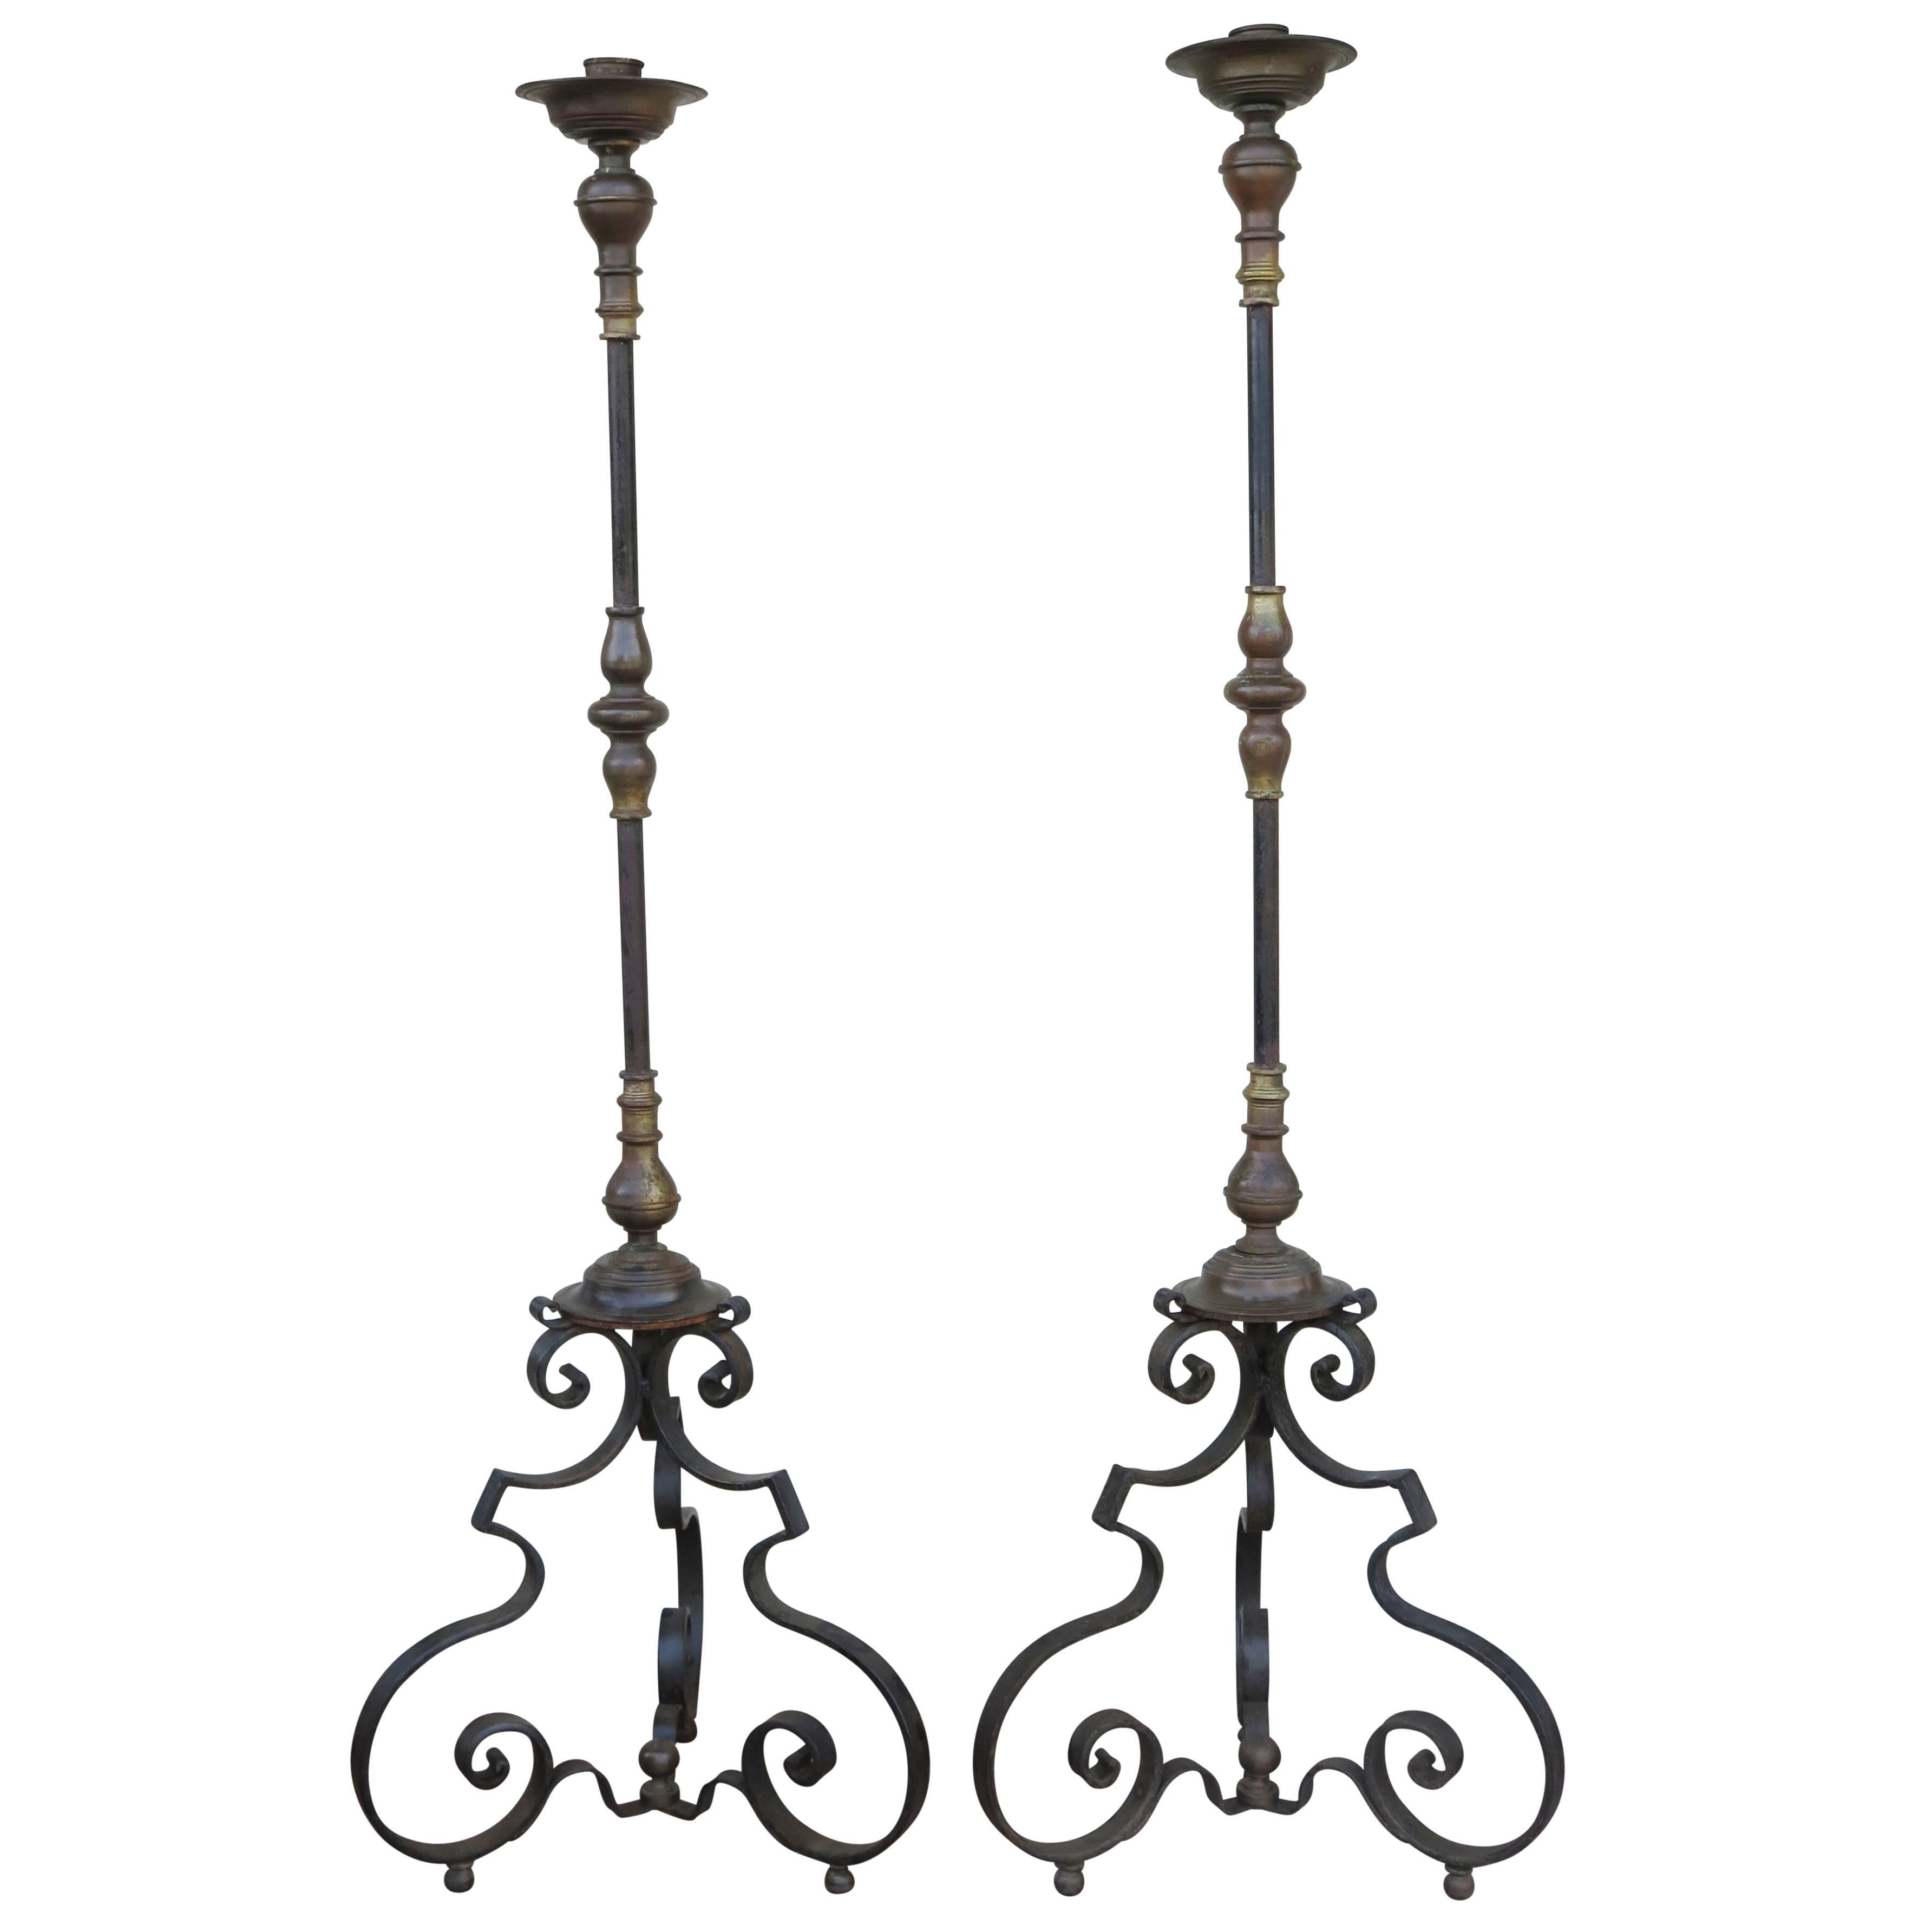 Excellent Pair of Iron and Bronze Torcheres Candleholders Spanish or Italian